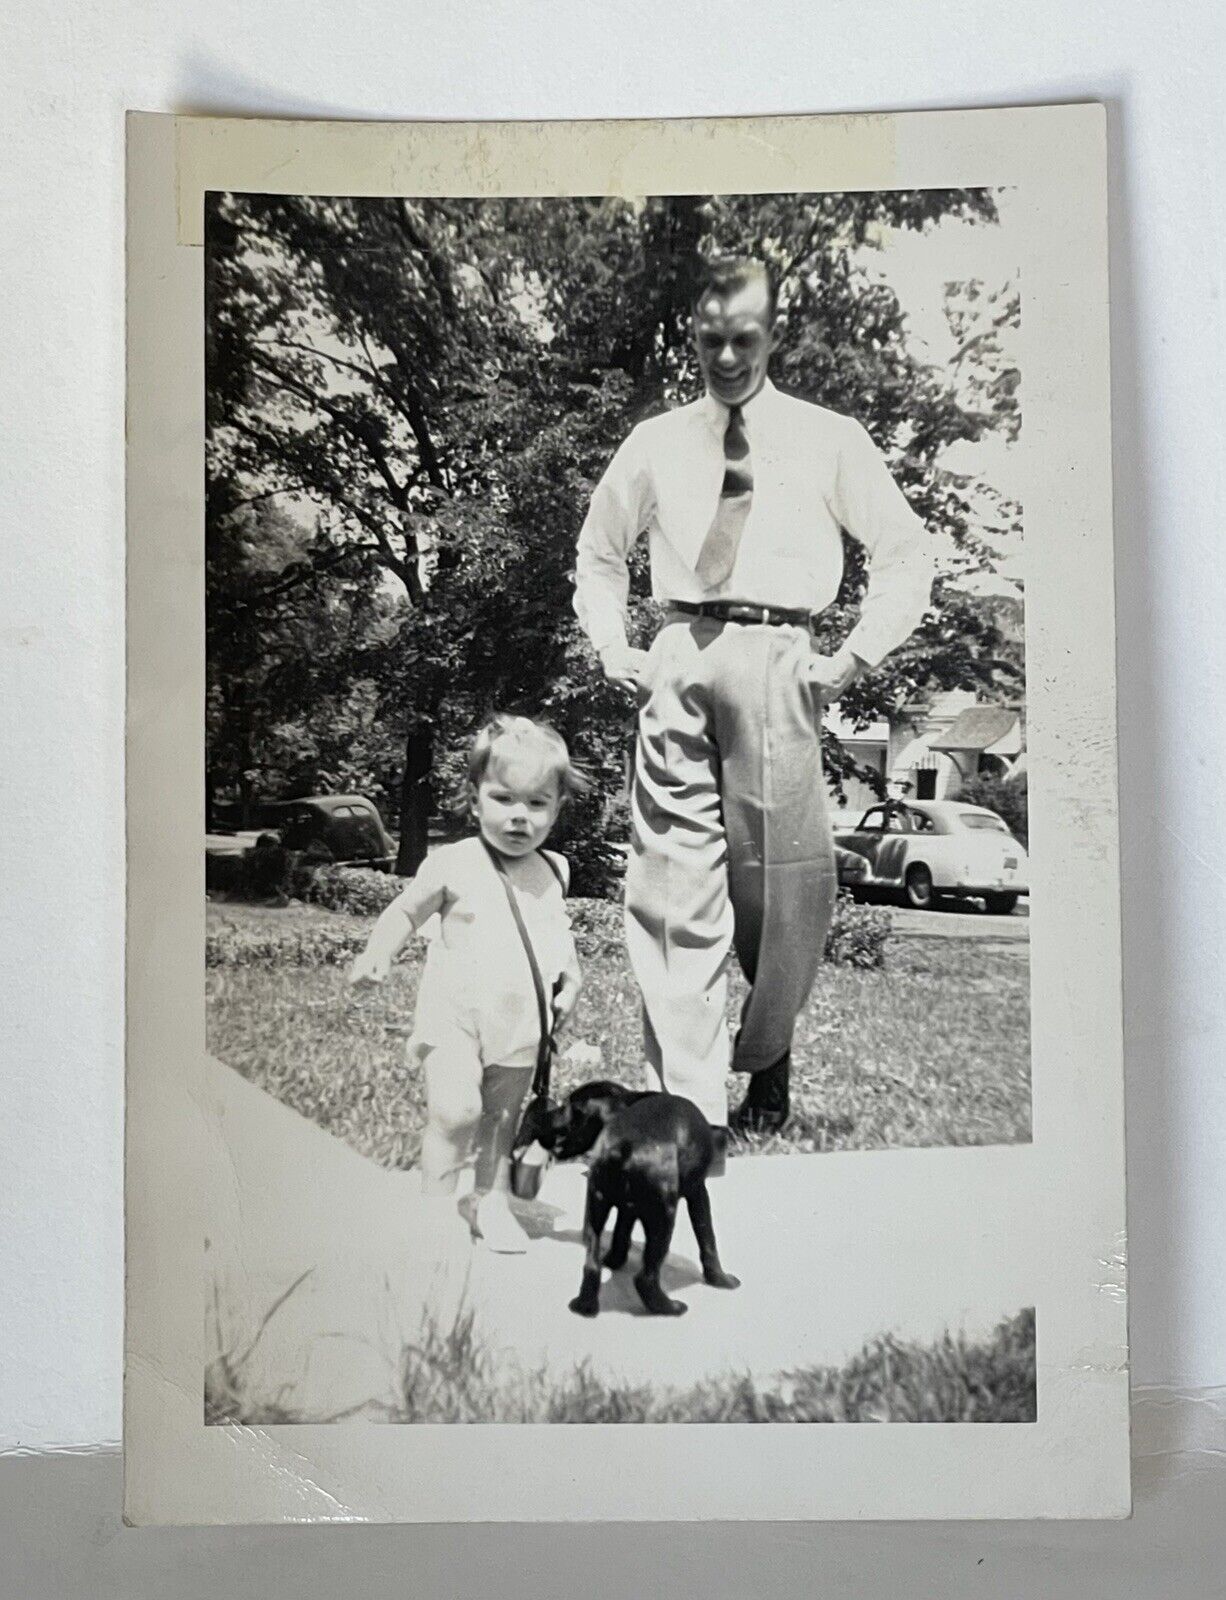 Vintage Photo Black White Snapshot Cute Puppy Dog Little Girl With Her Father